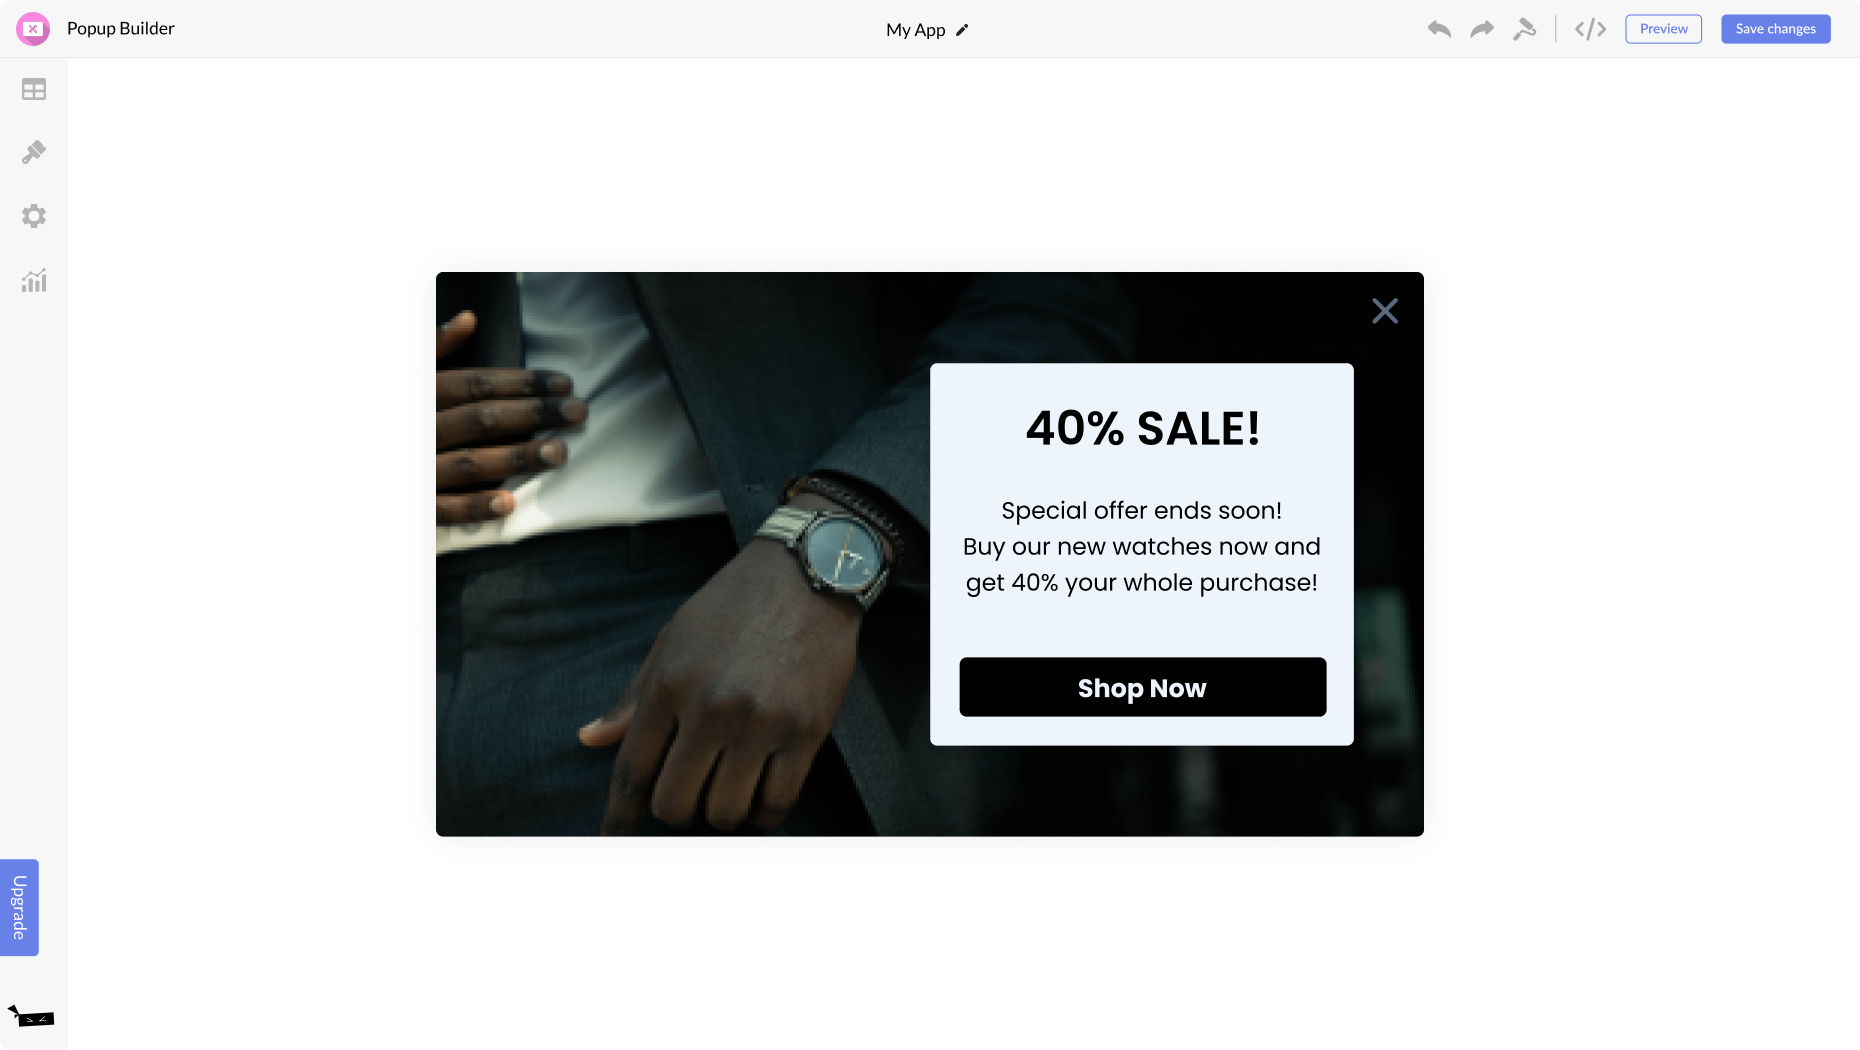 Popup Builder for Wix